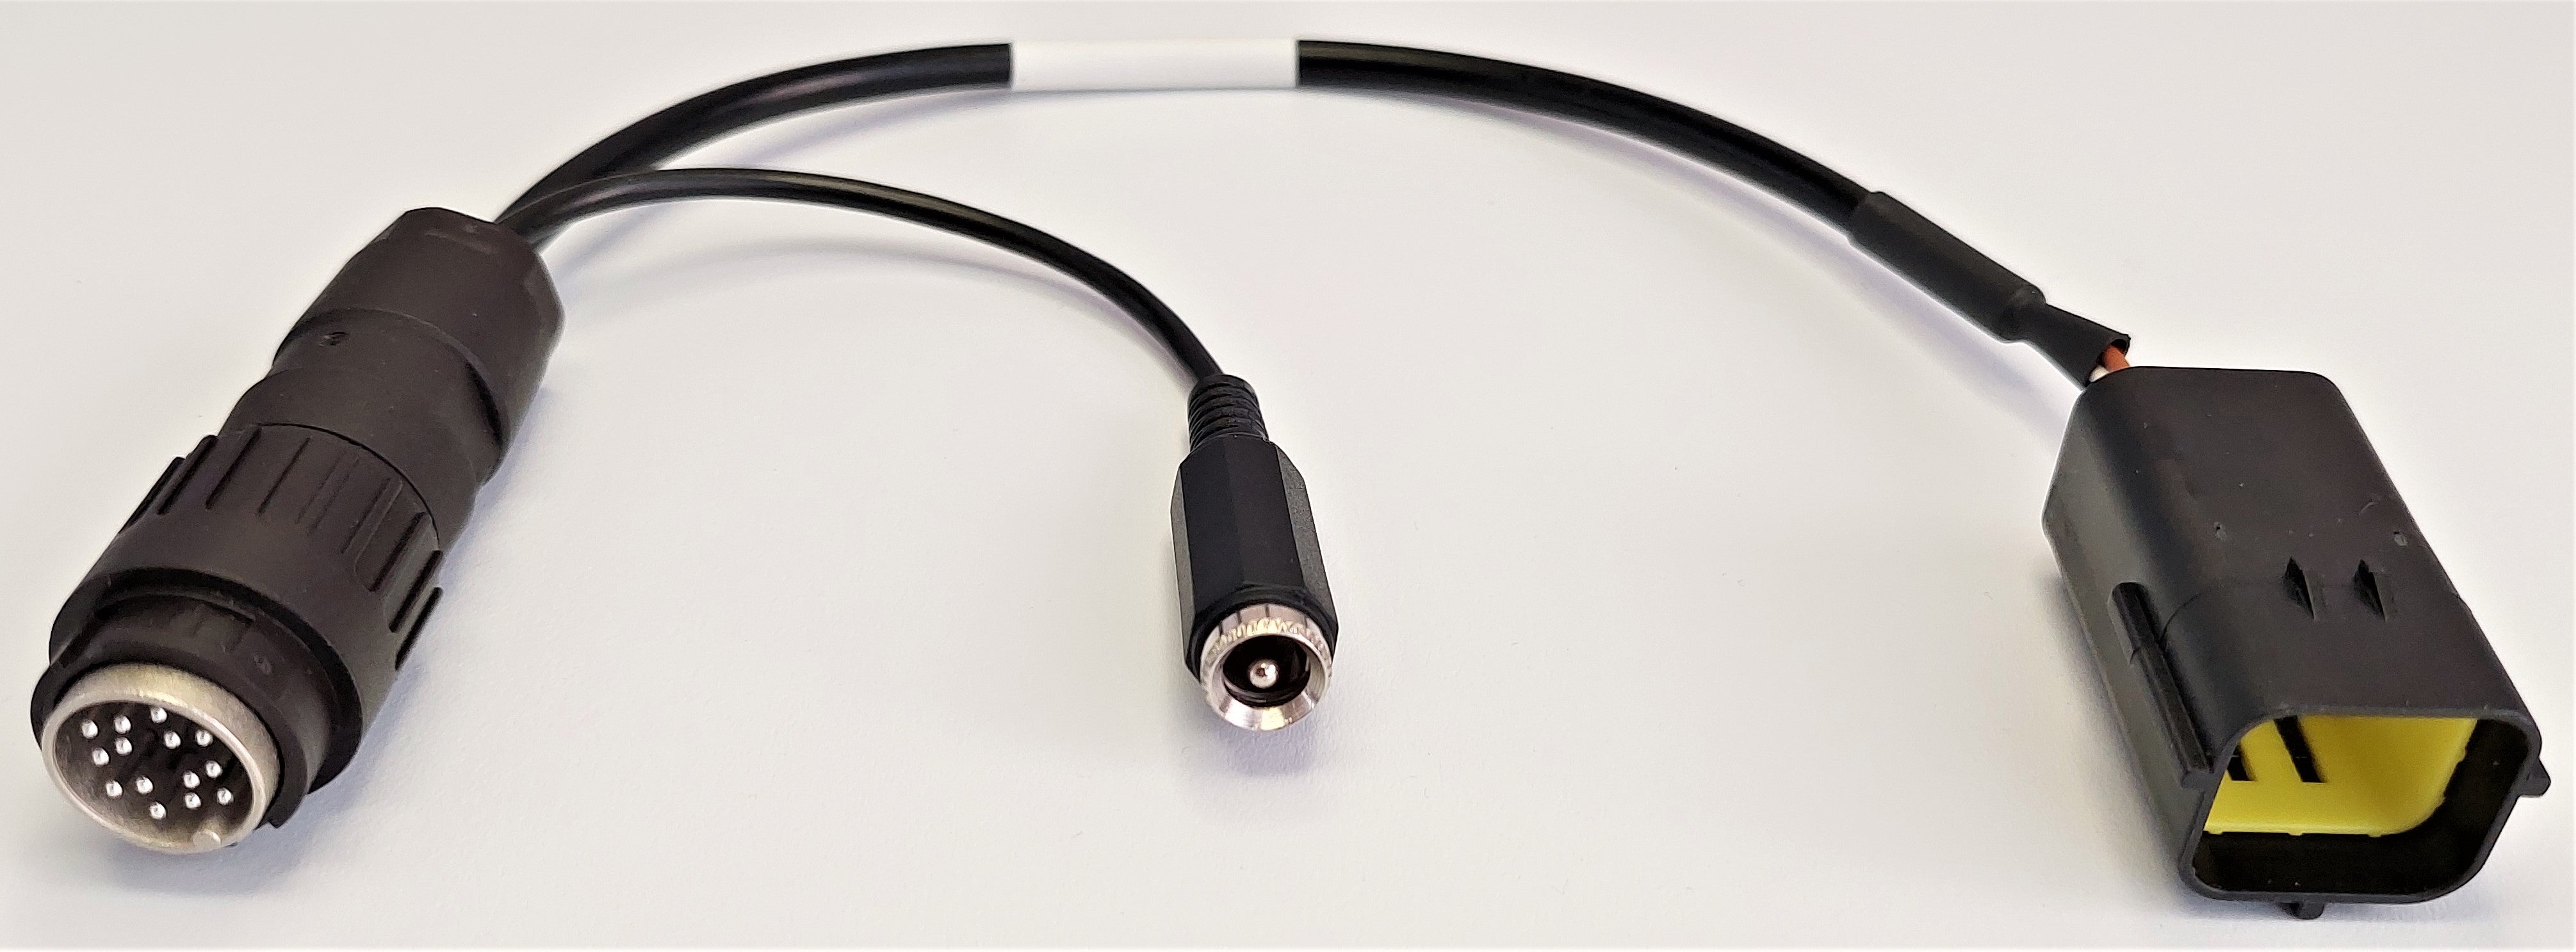 The MS594 – SWM 6-Pin Connection Cable, supports SWM models (Limited Models -  Check Vehicle List) and is compatible with the MS6050 universal diagnostic scan tool.